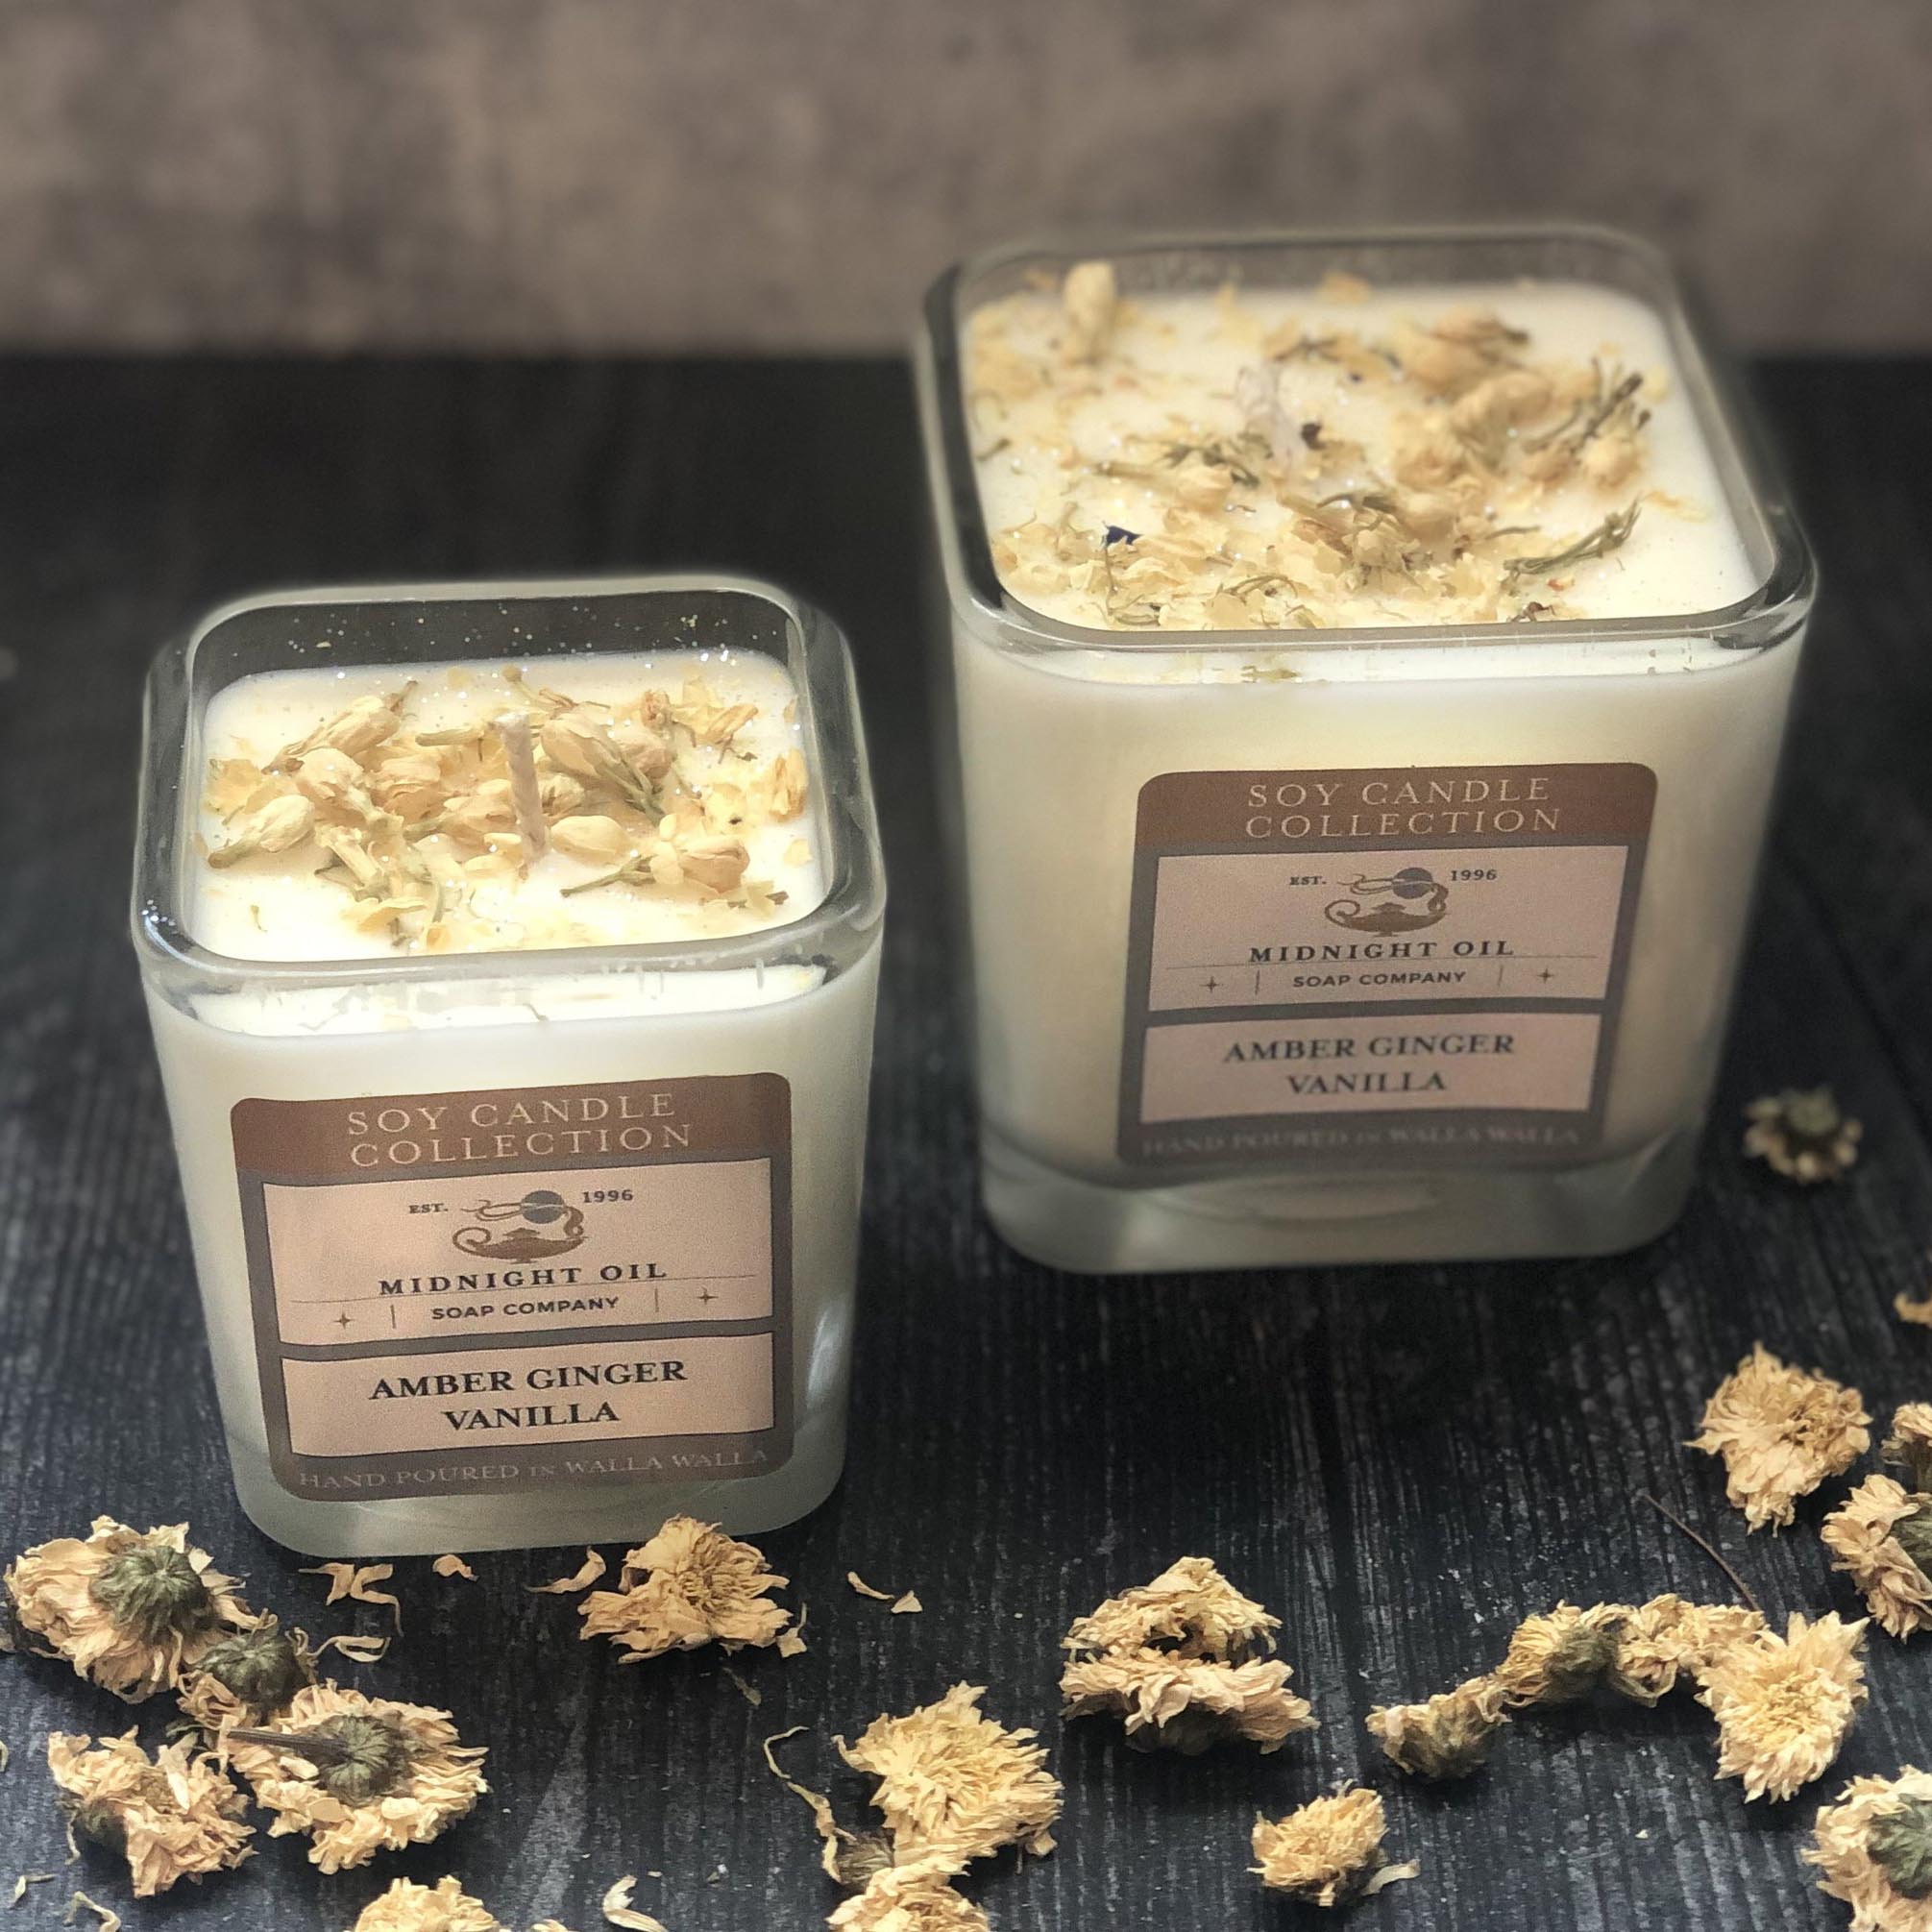 AMBER GINGER VANILLA ~Soy Candle